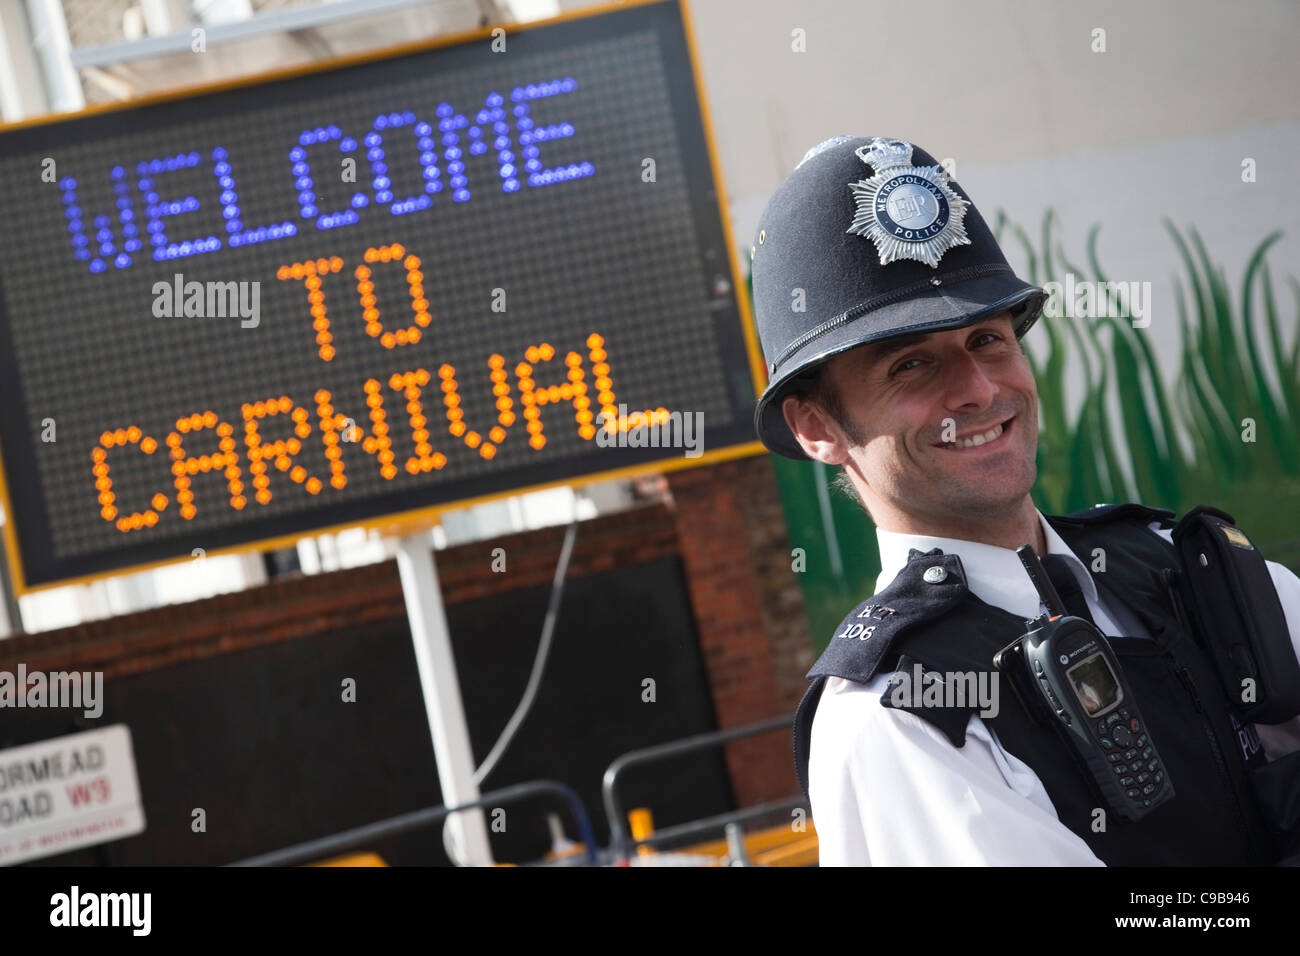 Notting Hill Carnival, Children's Day, friendly policeman Stock Photo